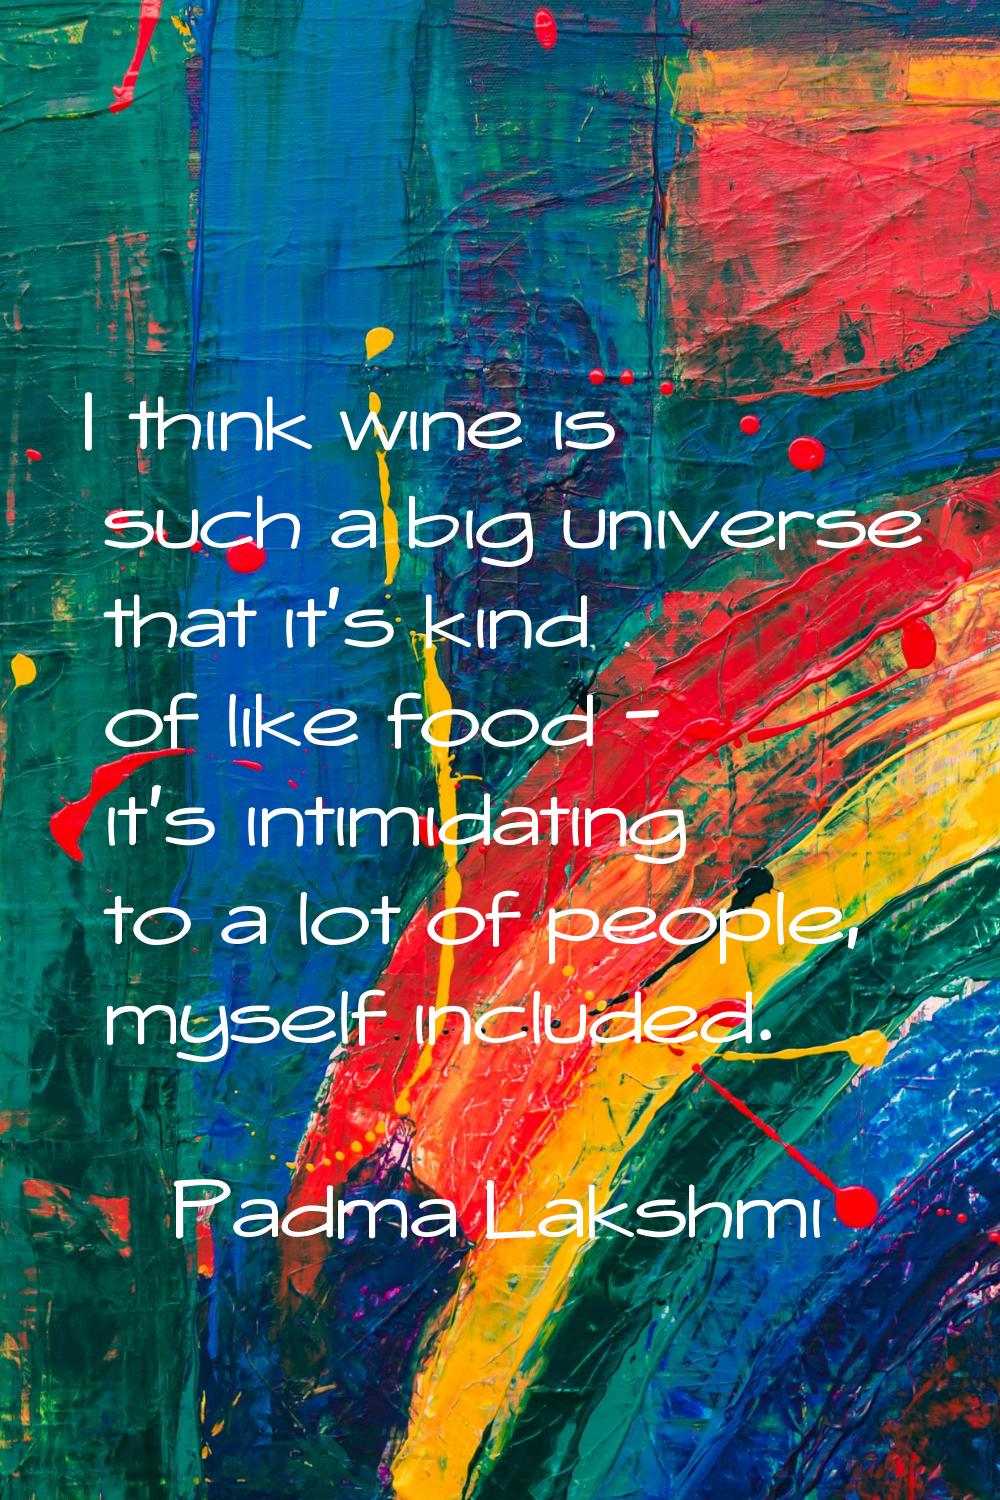 I think wine is such a big universe that it's kind of like food - it's intimidating to a lot of peo